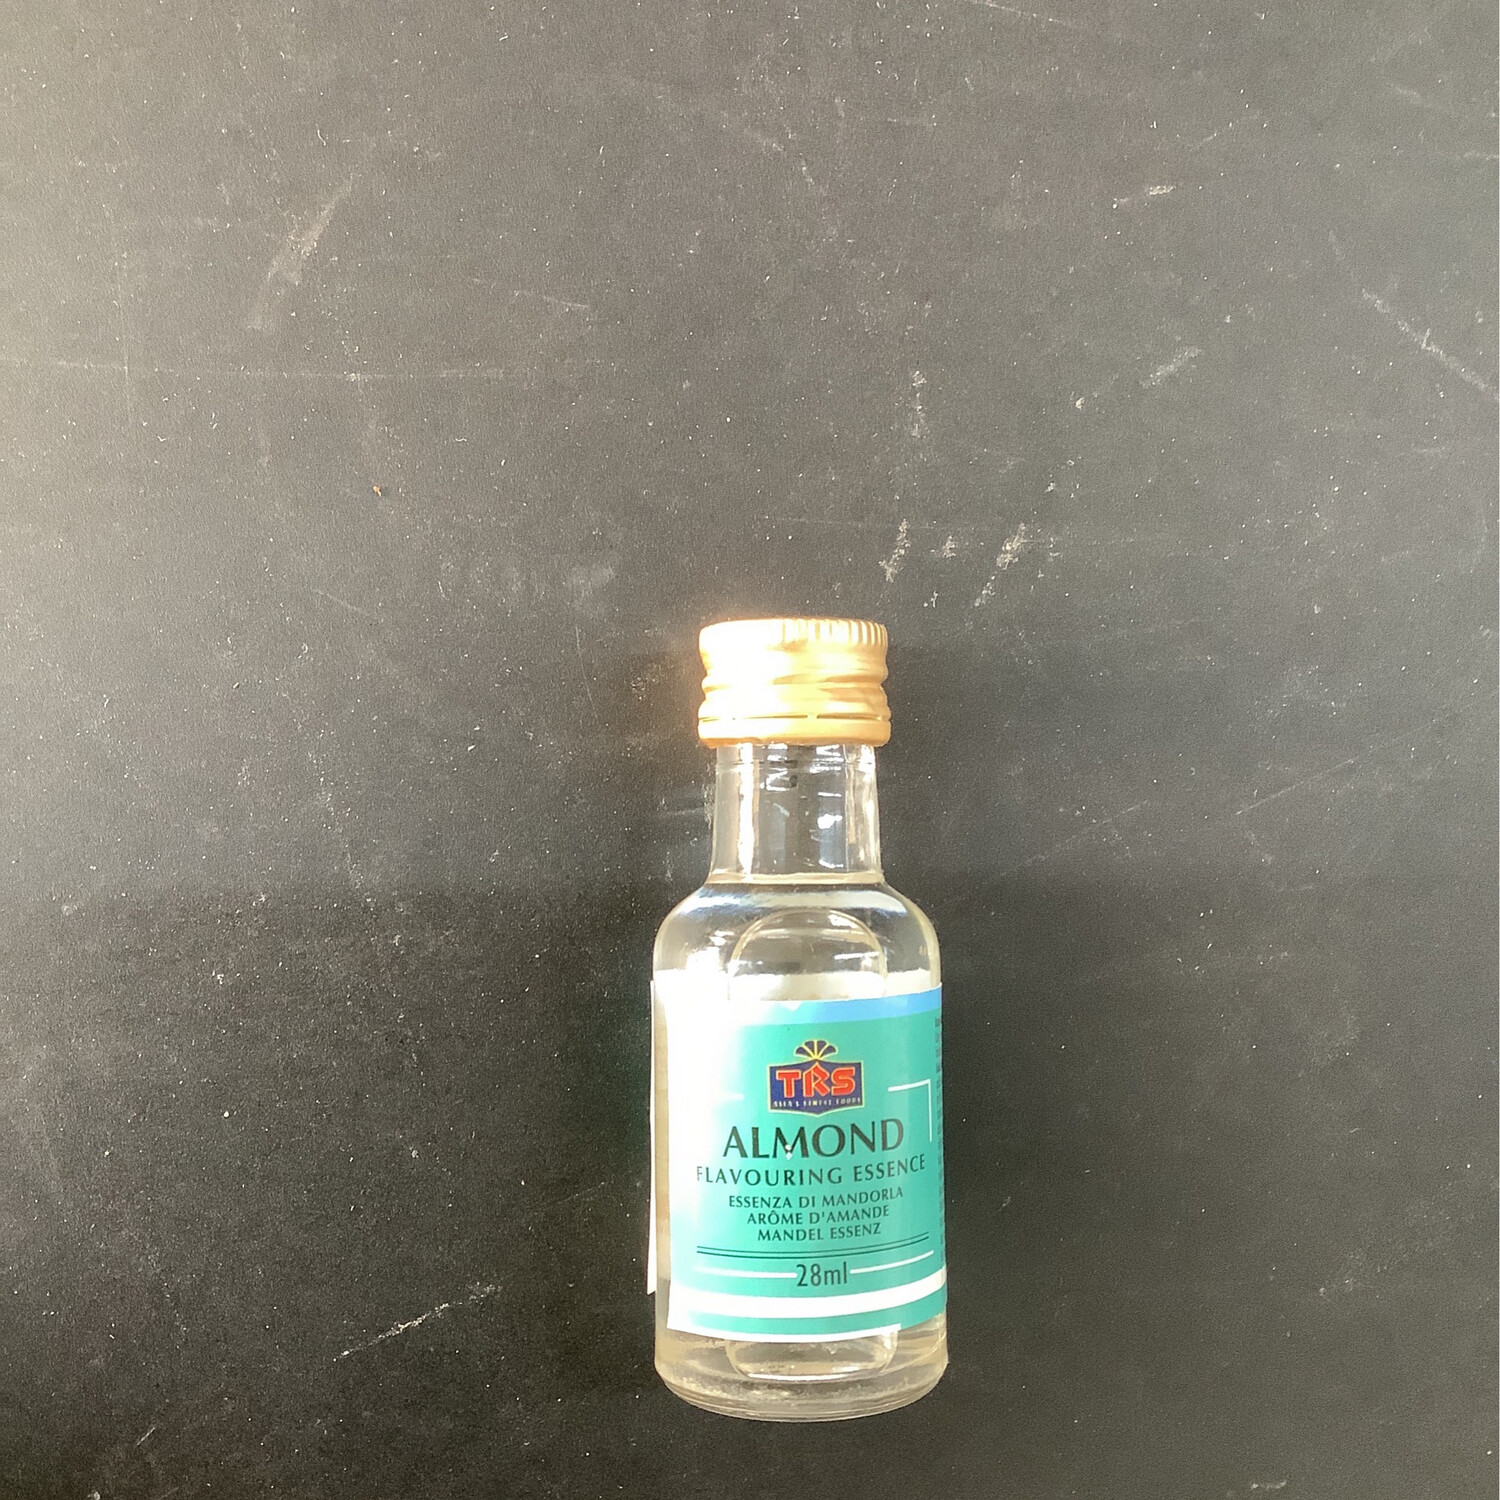 Trs Almond Flavouring Essence 28ml